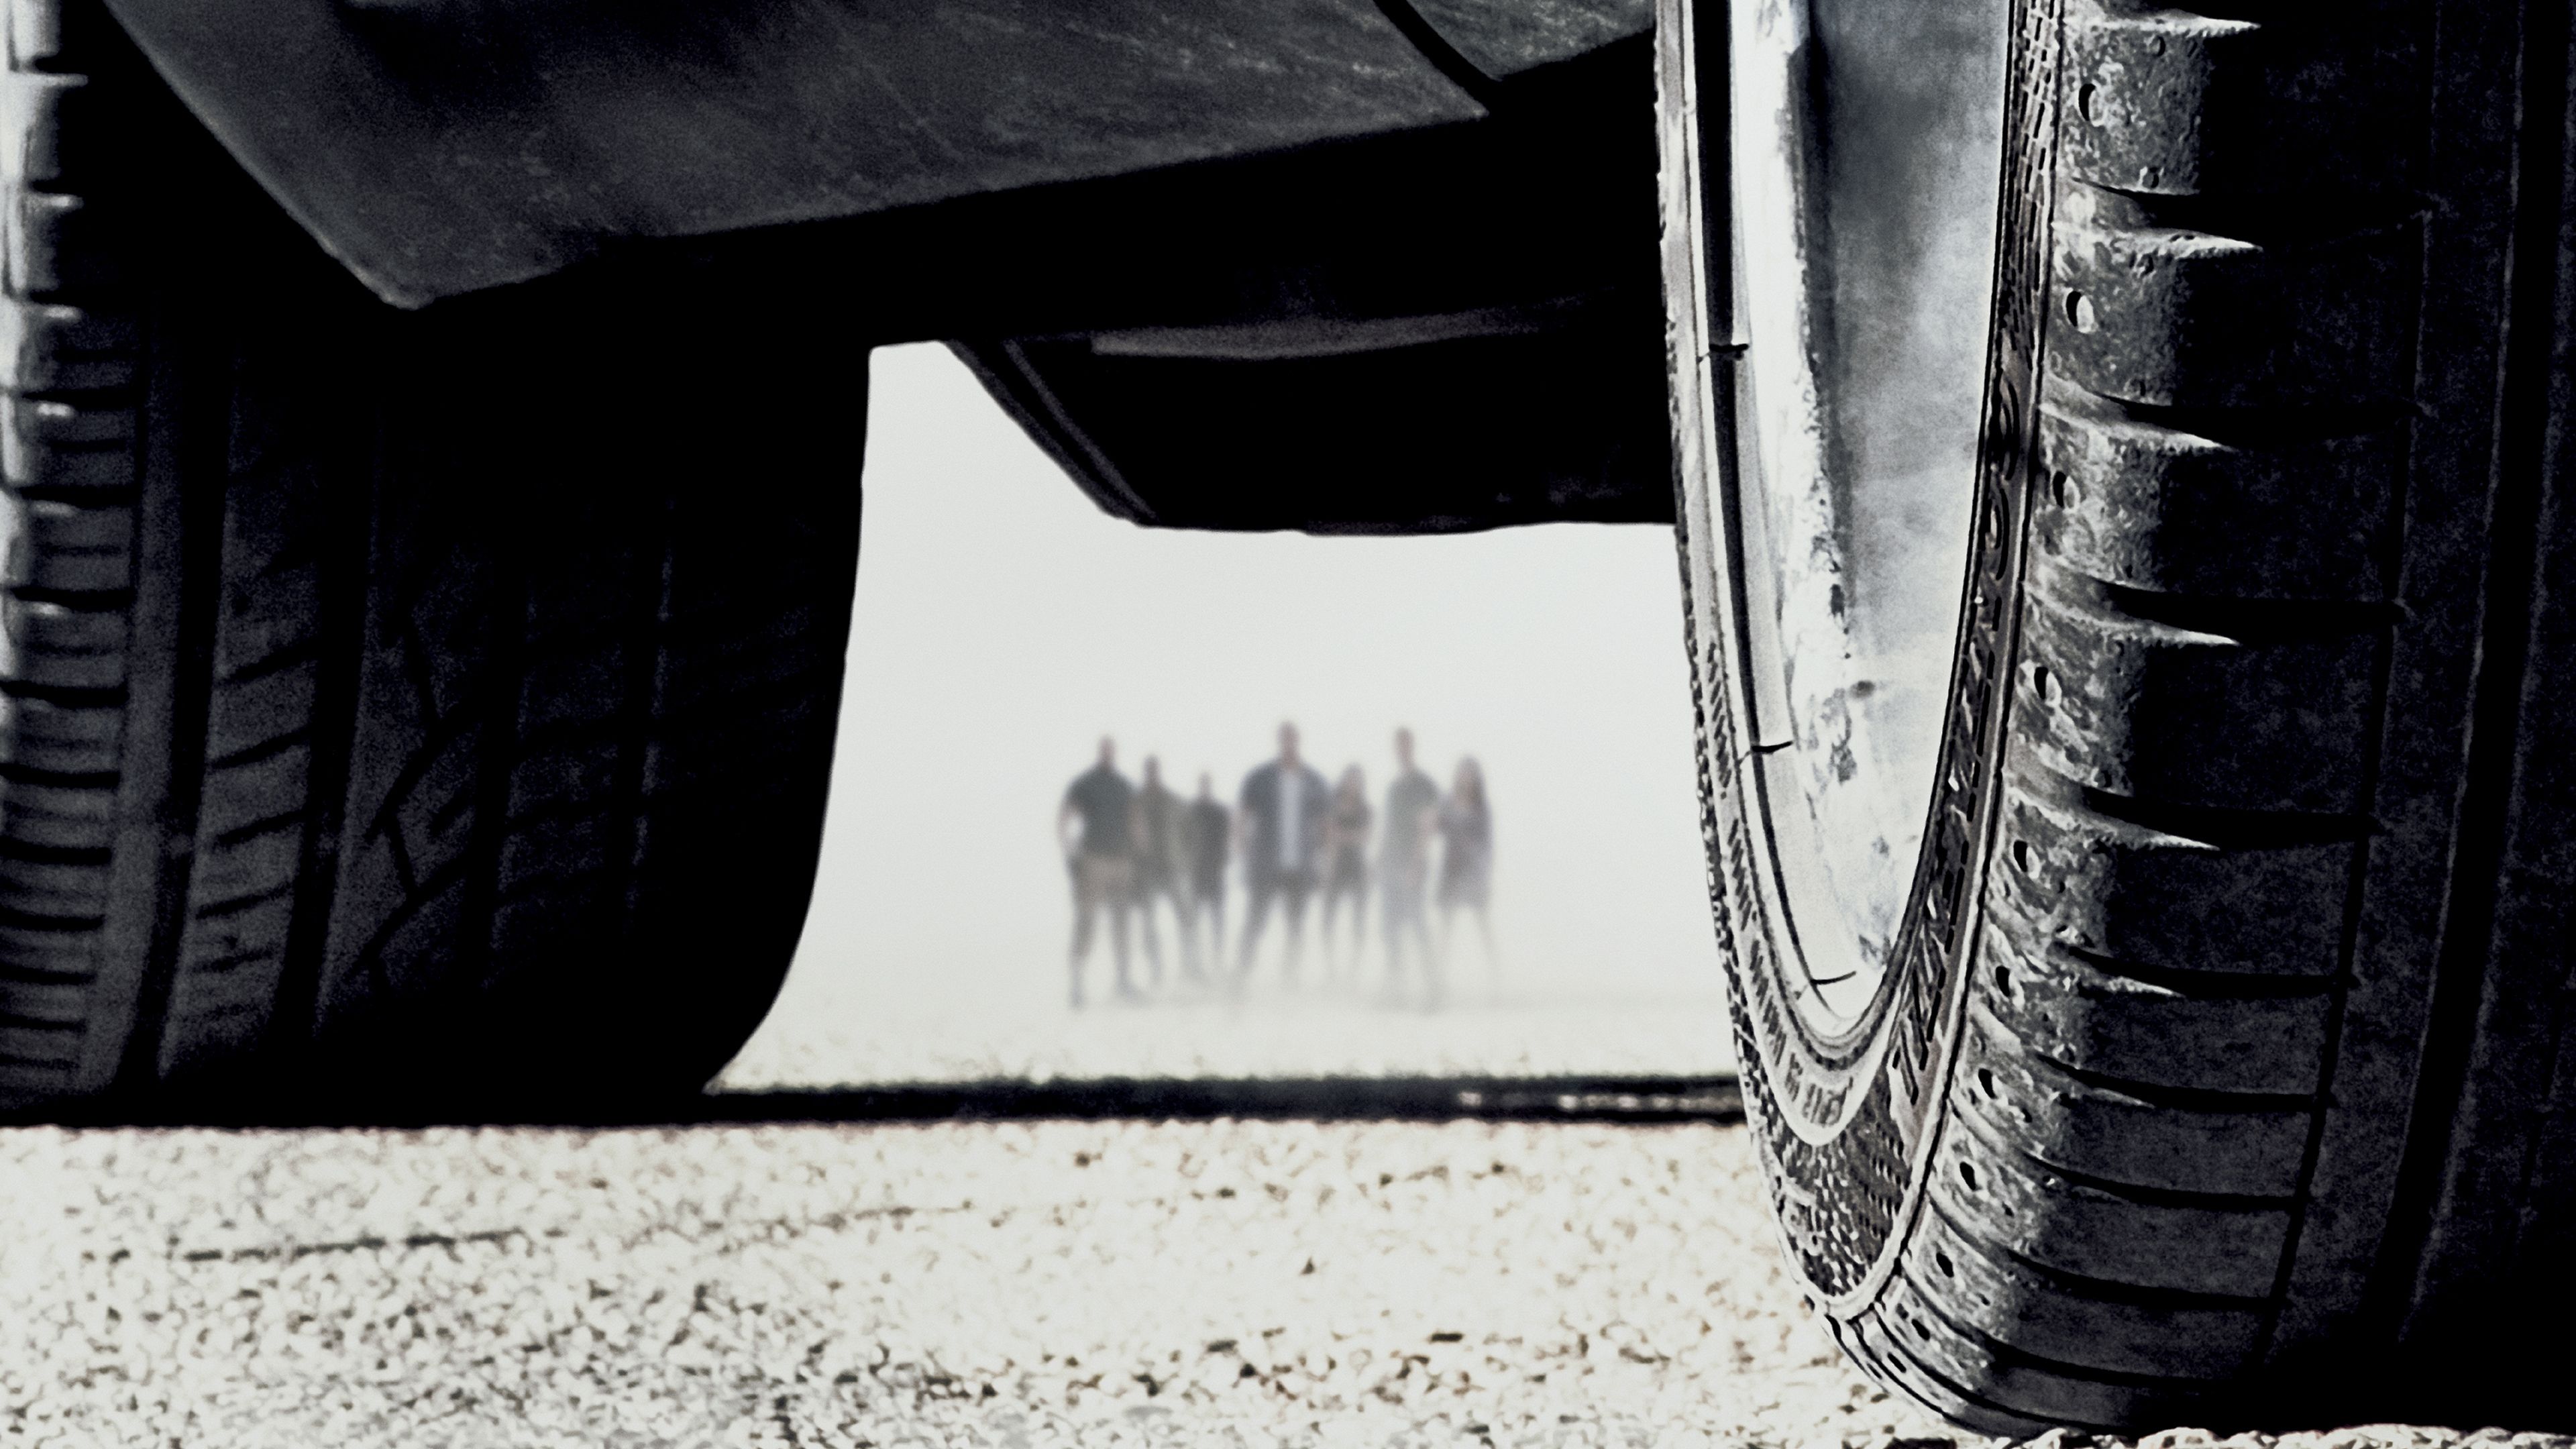 77 Furious 7 HD Wallpapers | Backgrounds - Wallpaper Abyss